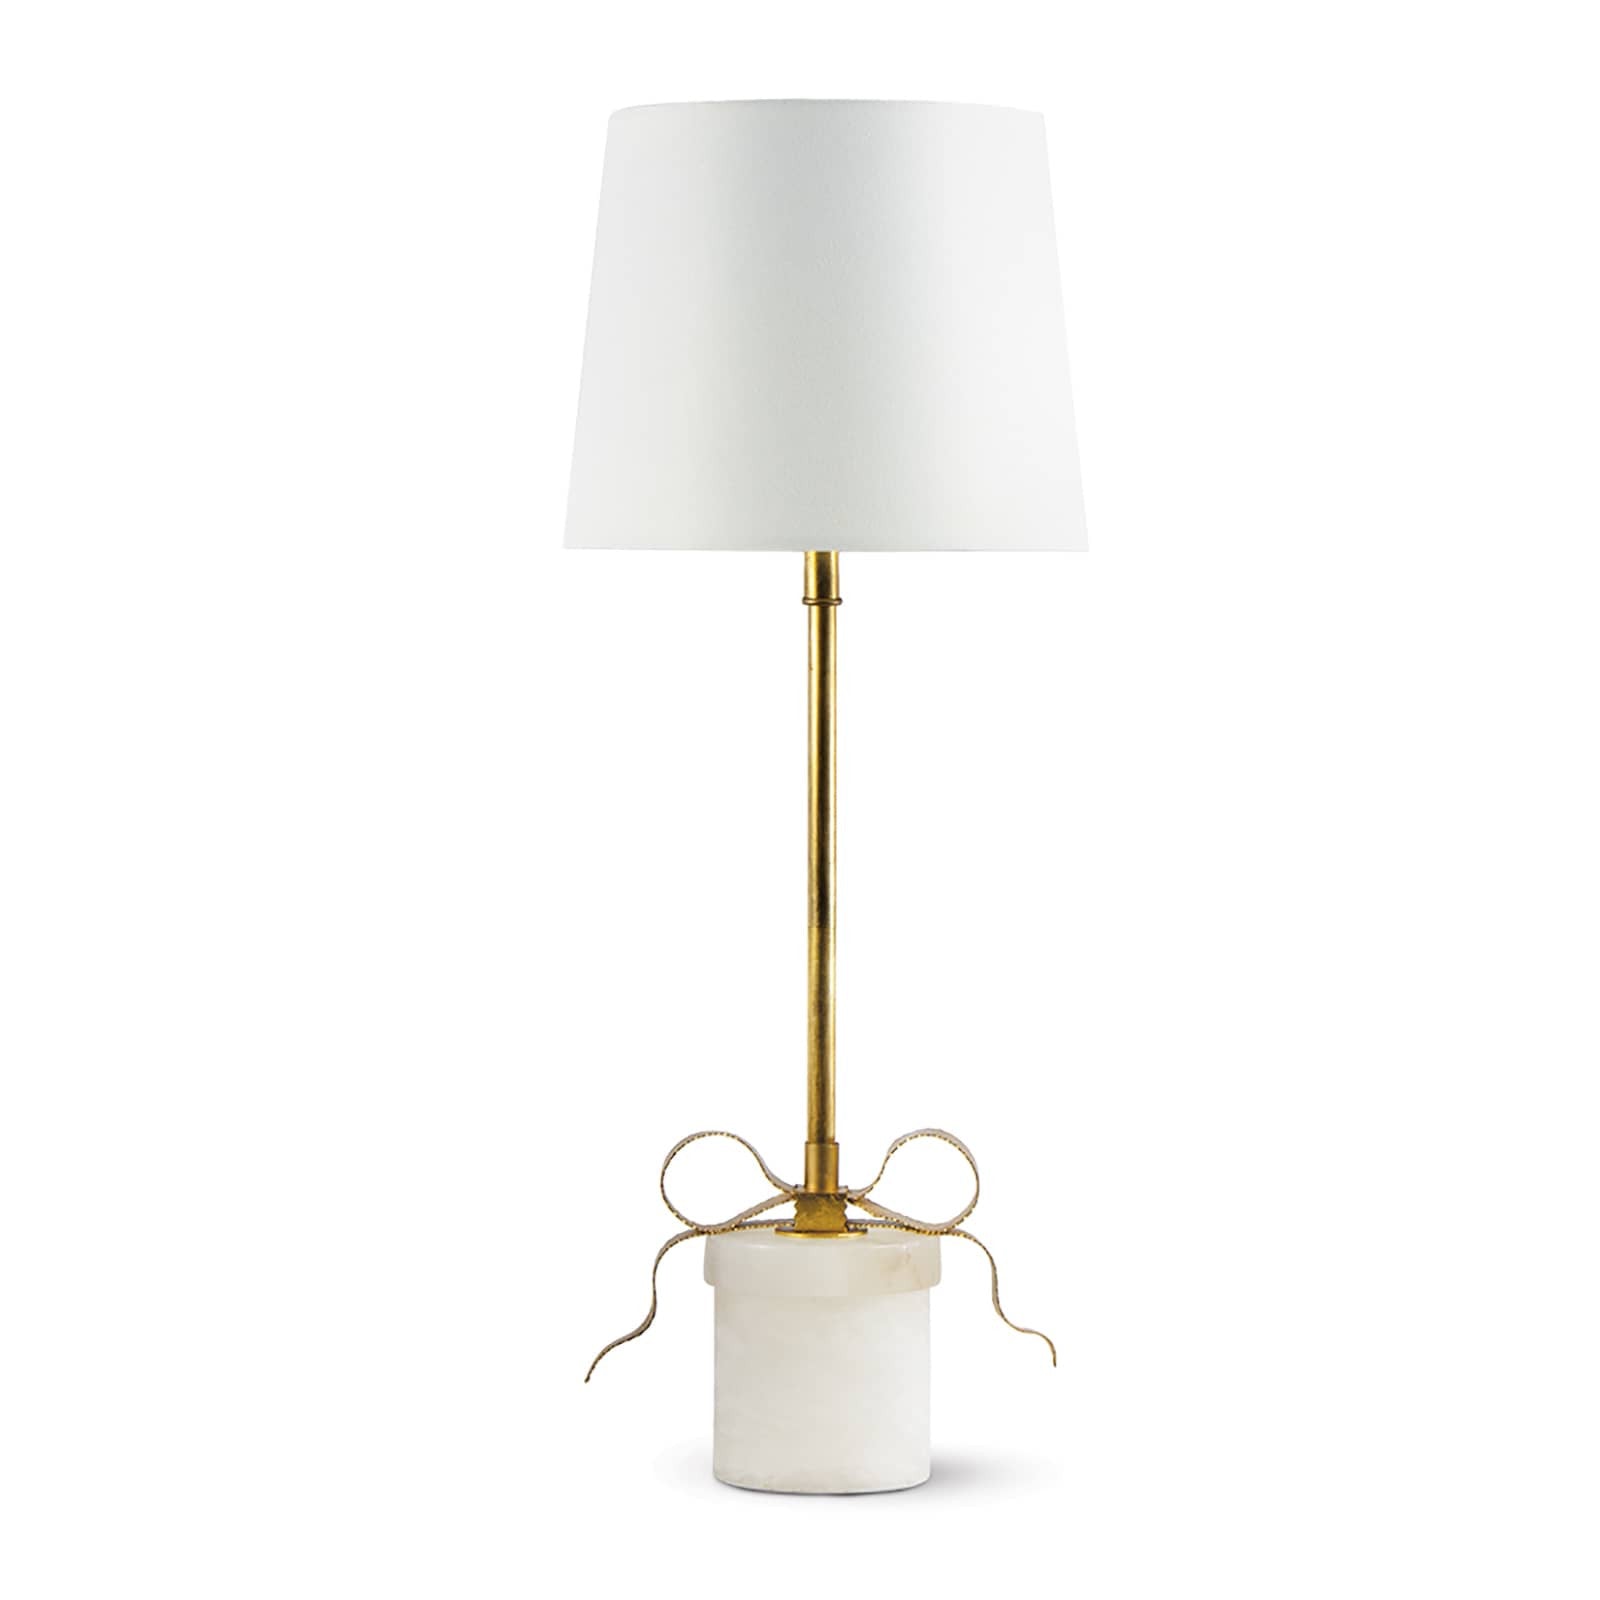 Regina Andrew, Ribbon Table Lamp - Southern Living Collection